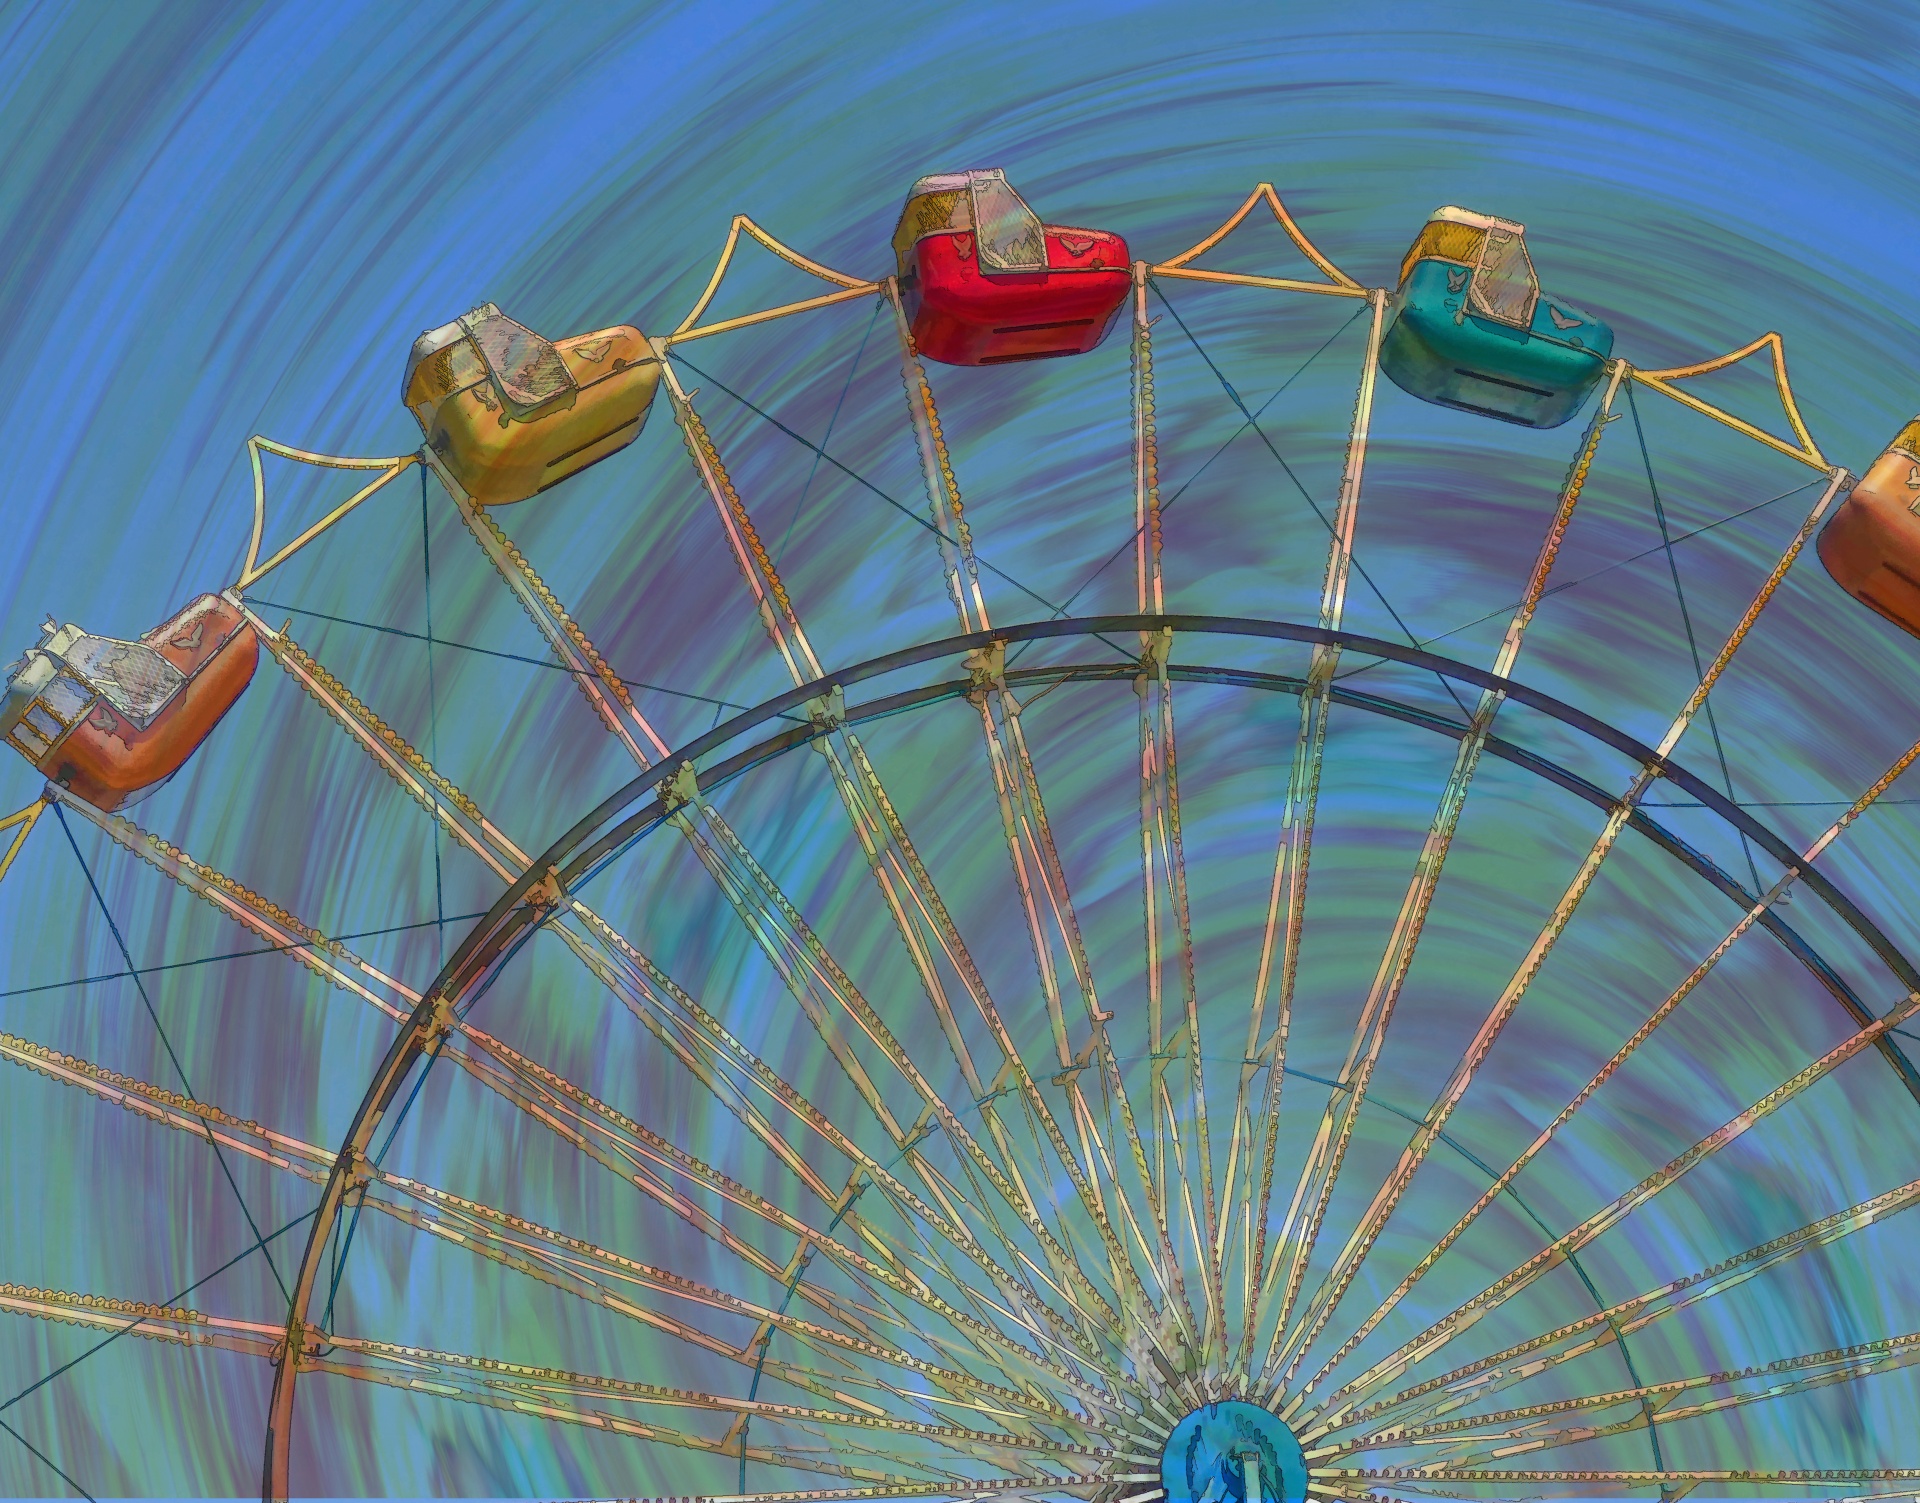 colorful artistic rendering of a Ferris wheel - green hues